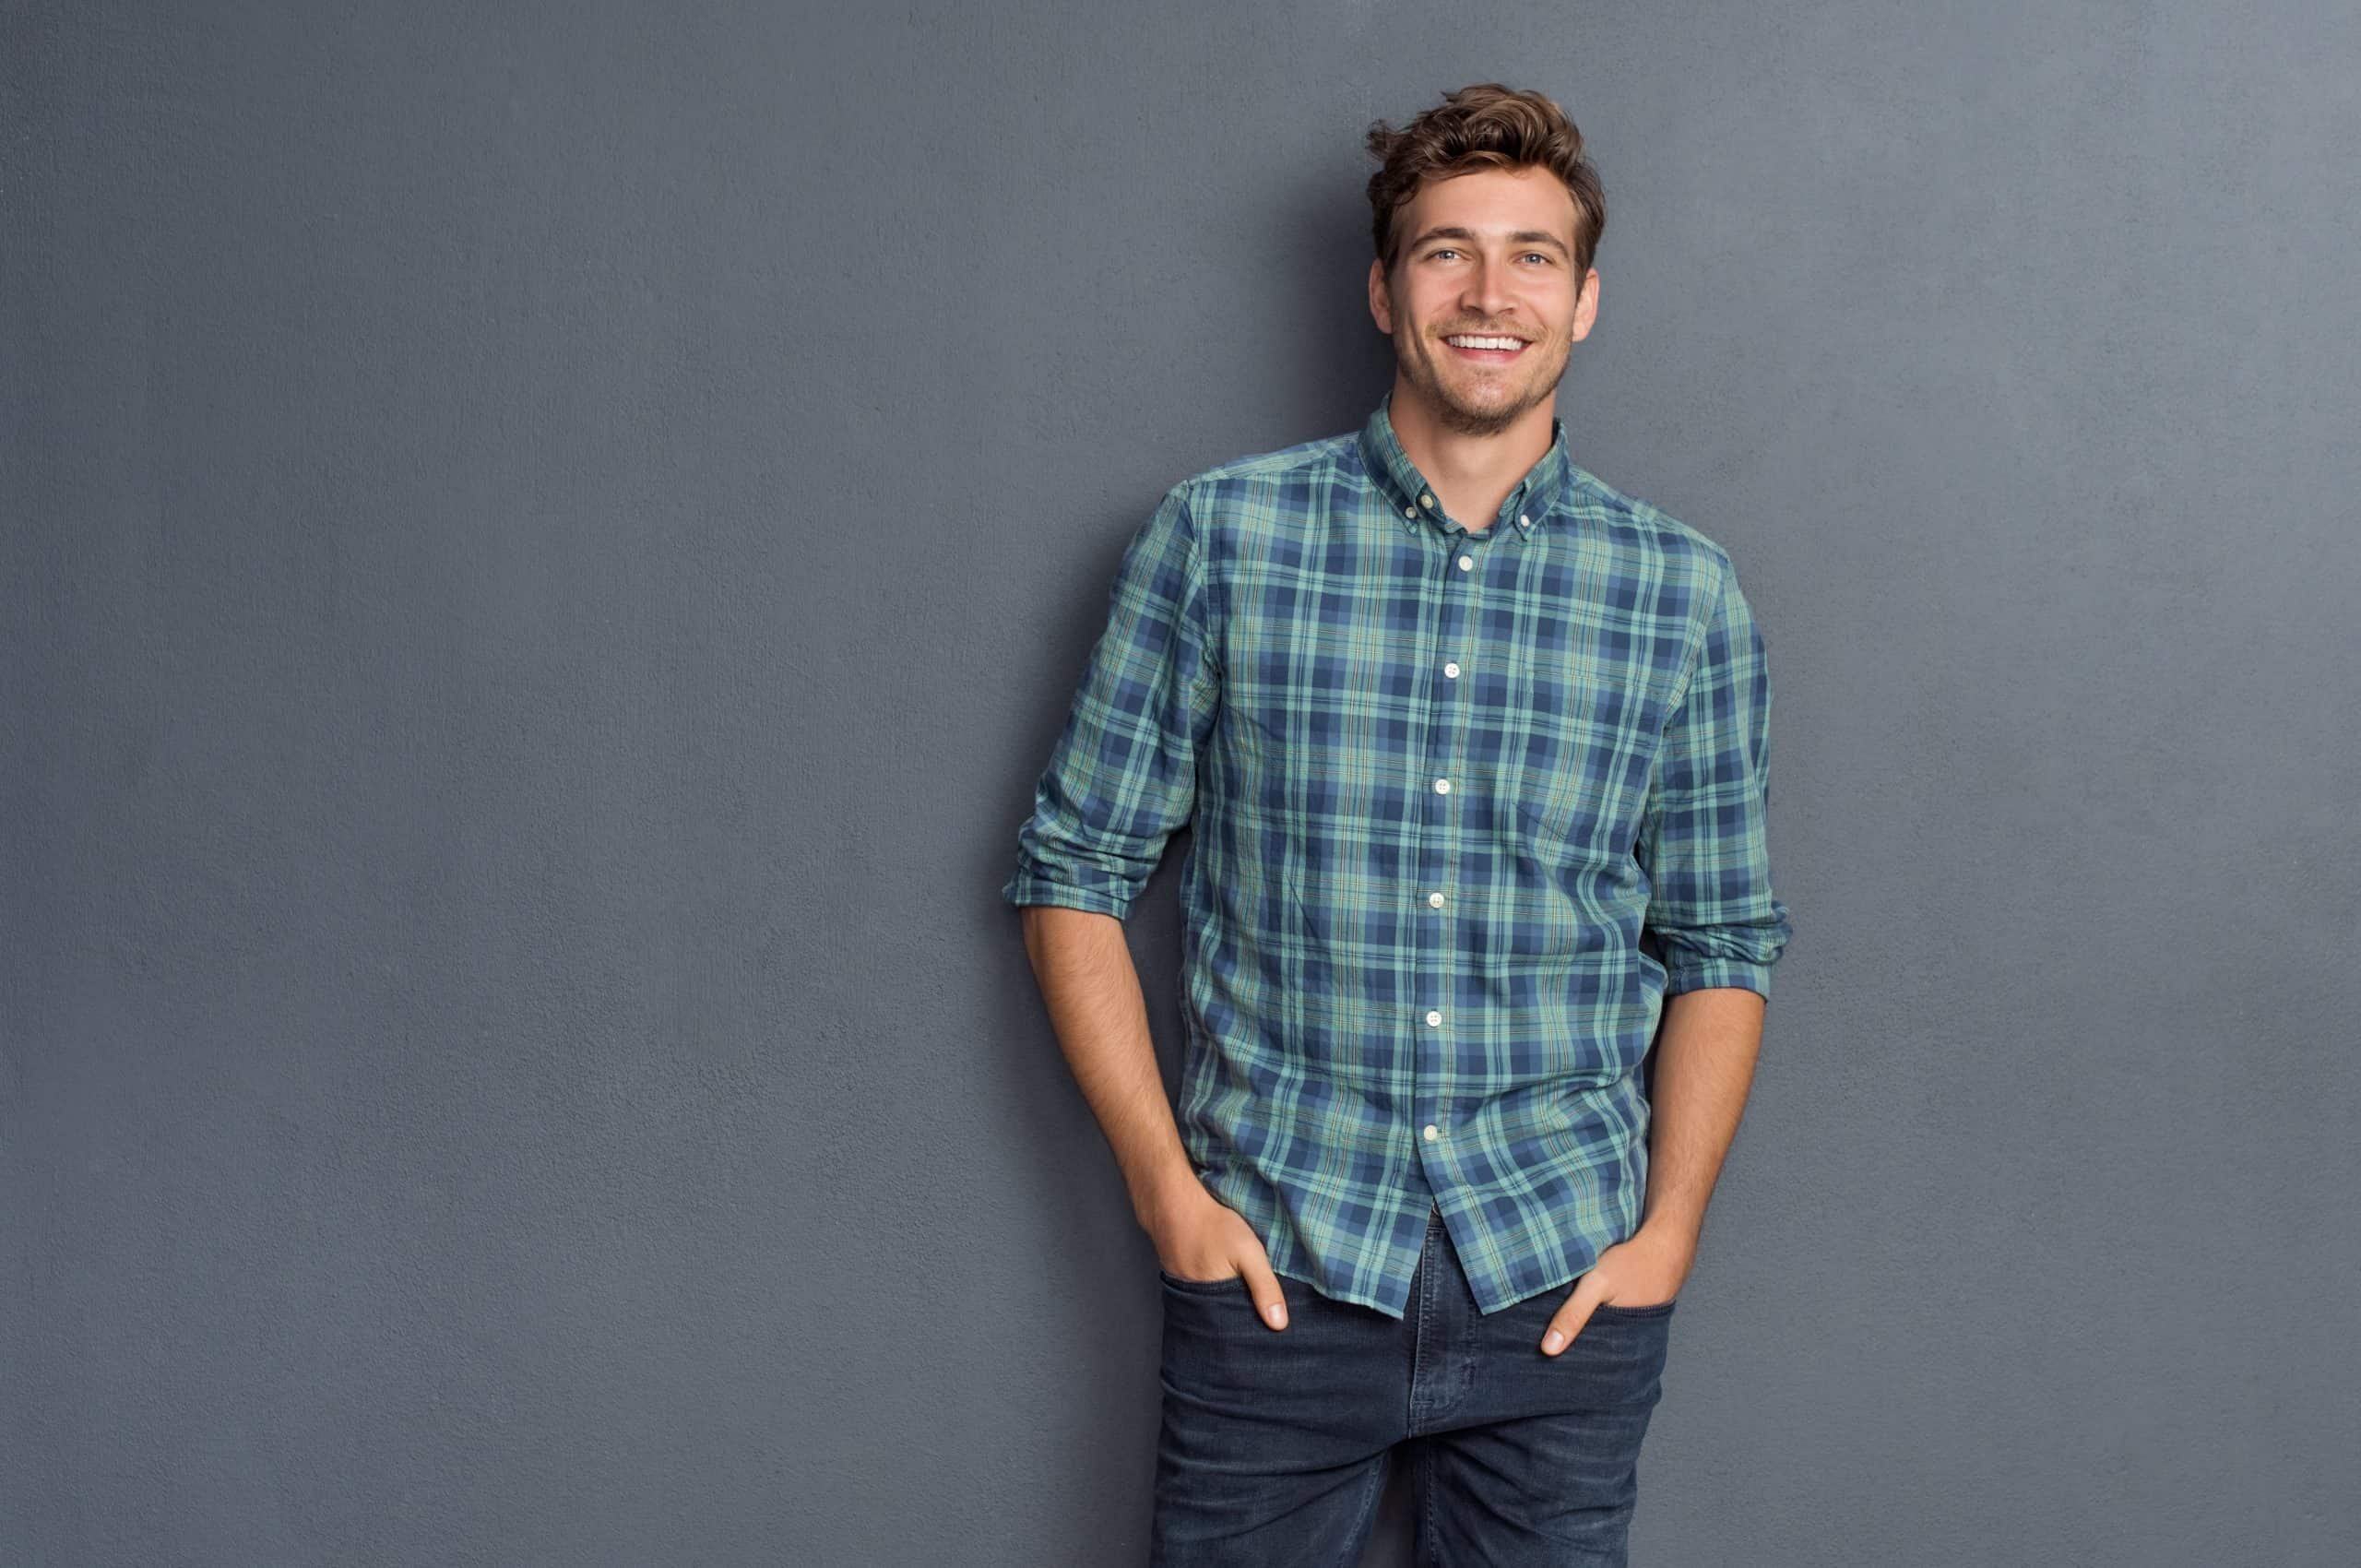 Wide shot of a man wearing a checkered shirt and smiling.